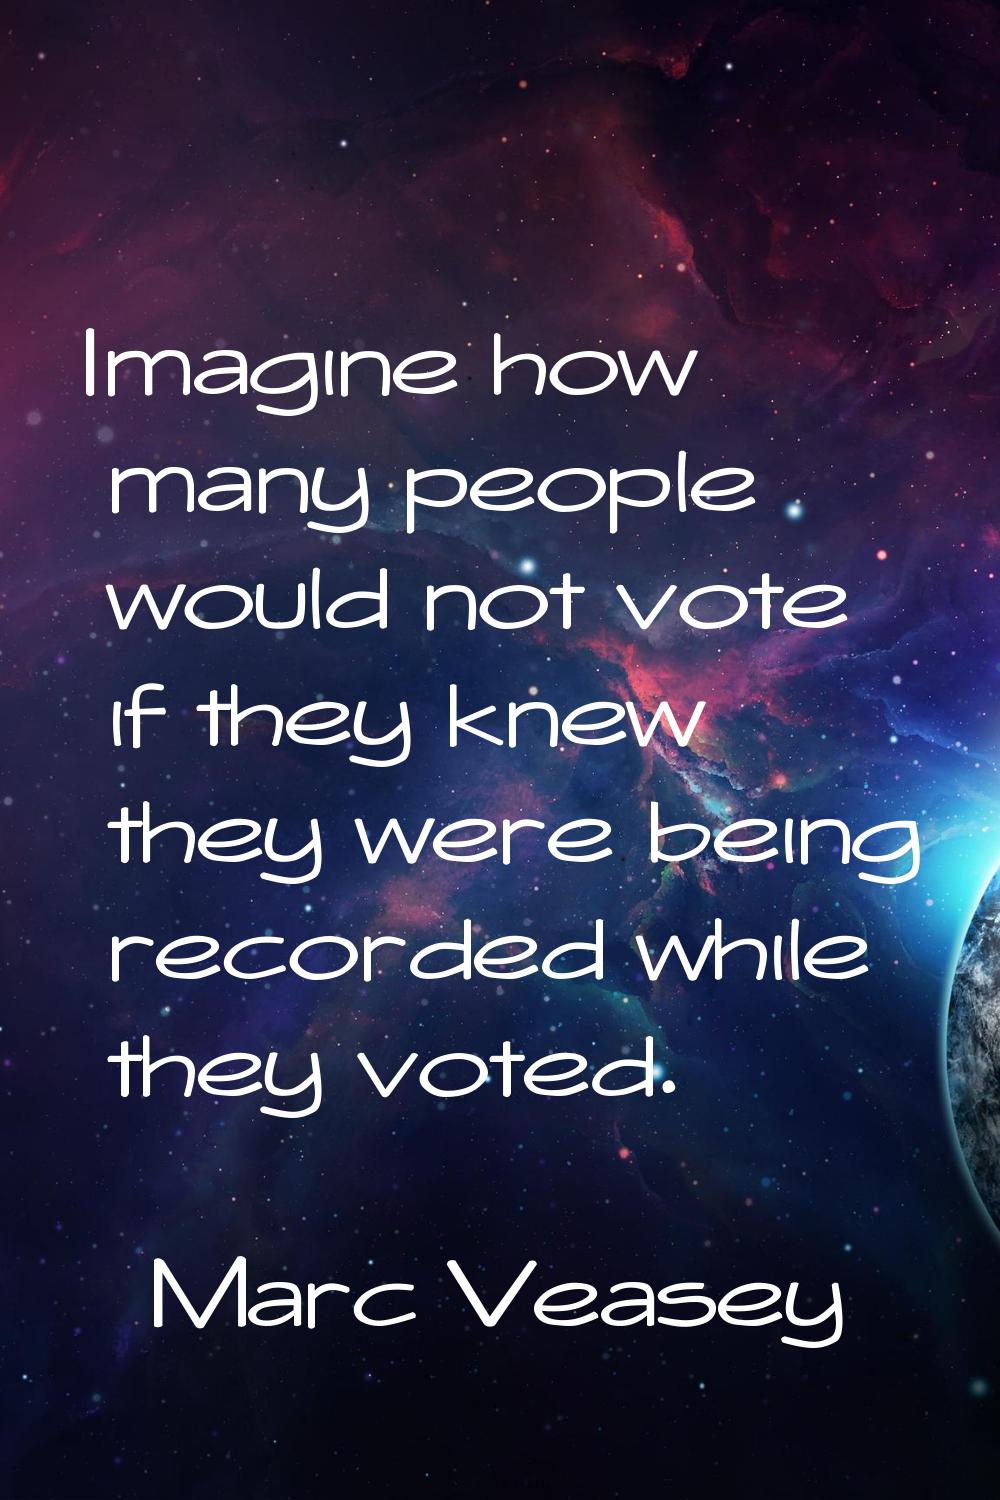 Imagine how many people would not vote if they knew they were being recorded while they voted.